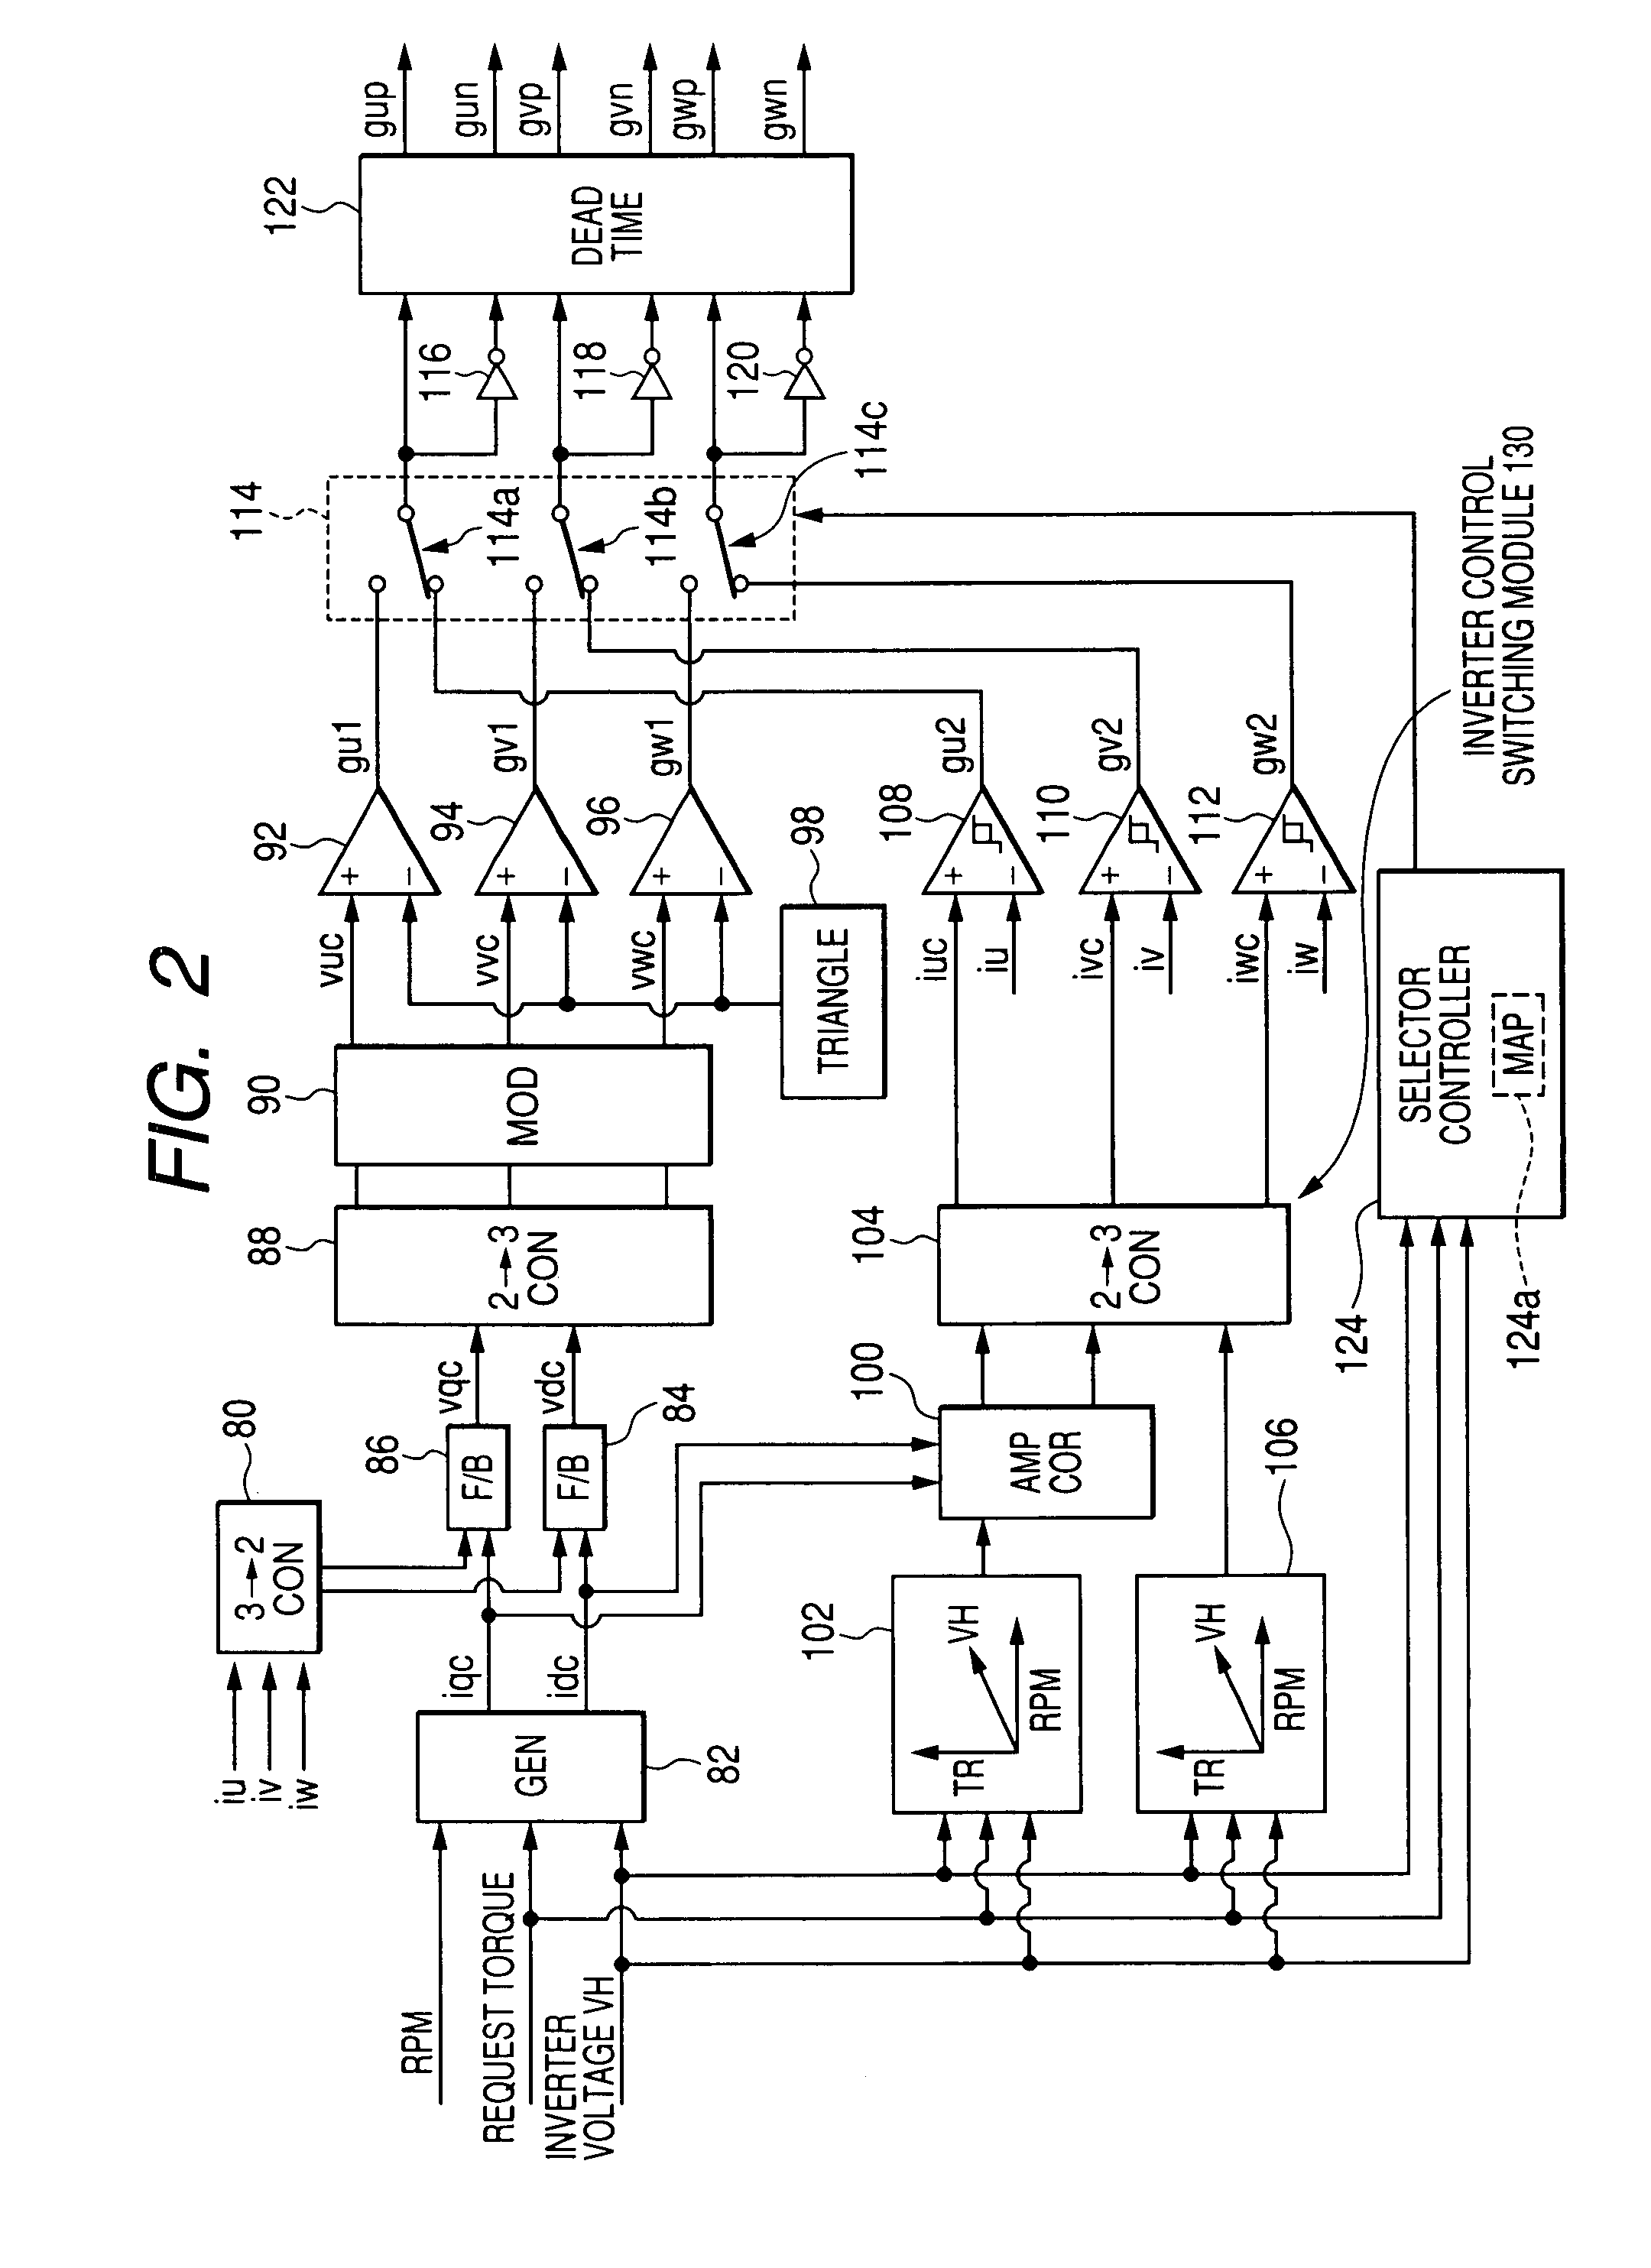 Control system for multiphase rotary electric machines